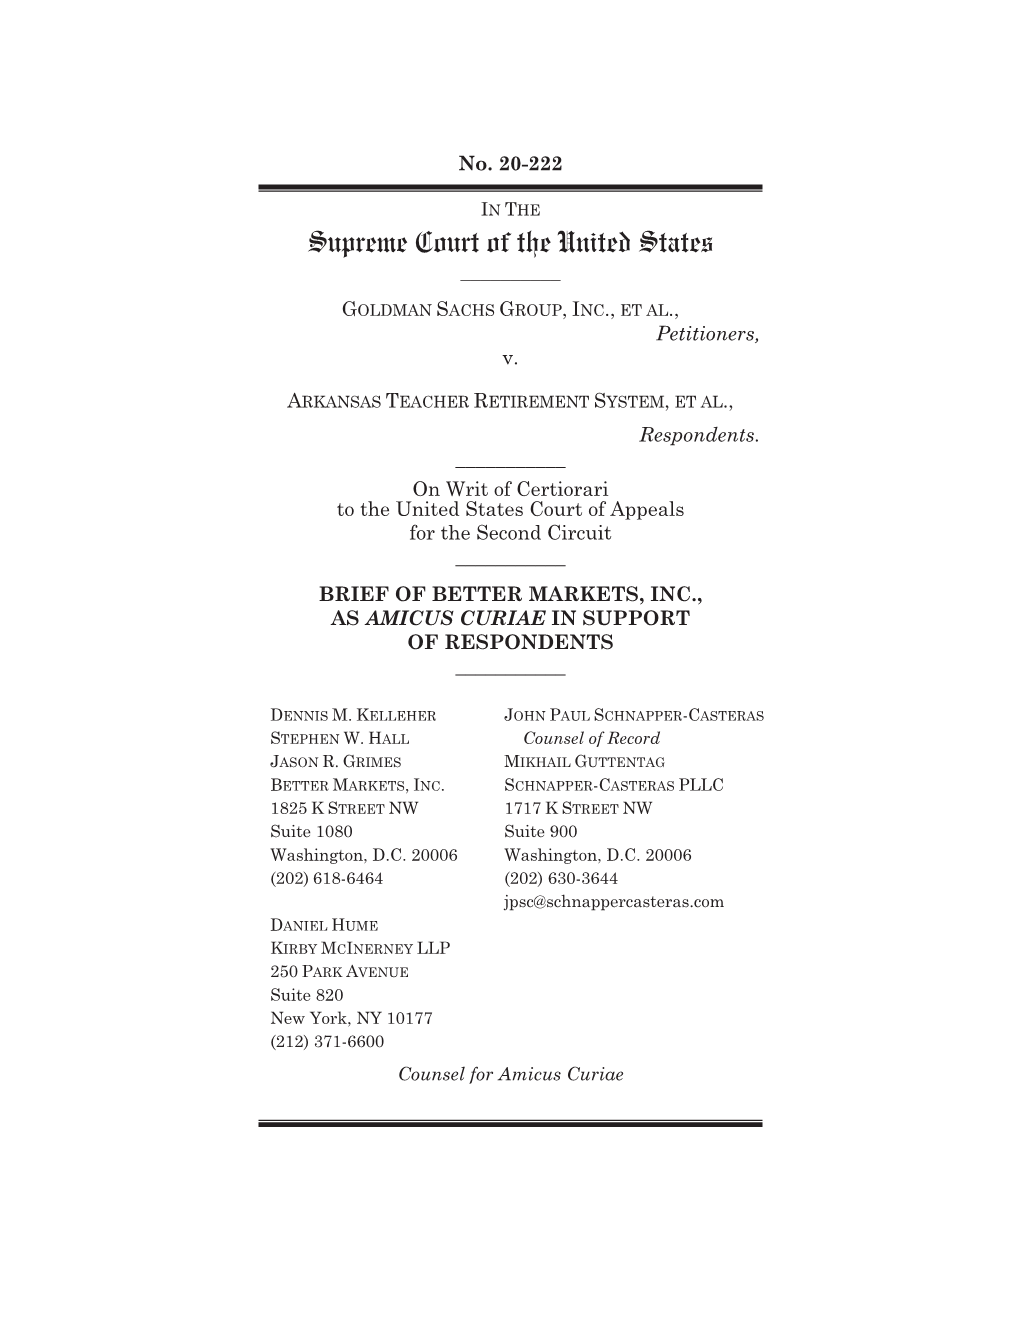 Brief of Better Markets, Inc., As Amicus Curiae in Support of Respondents ______